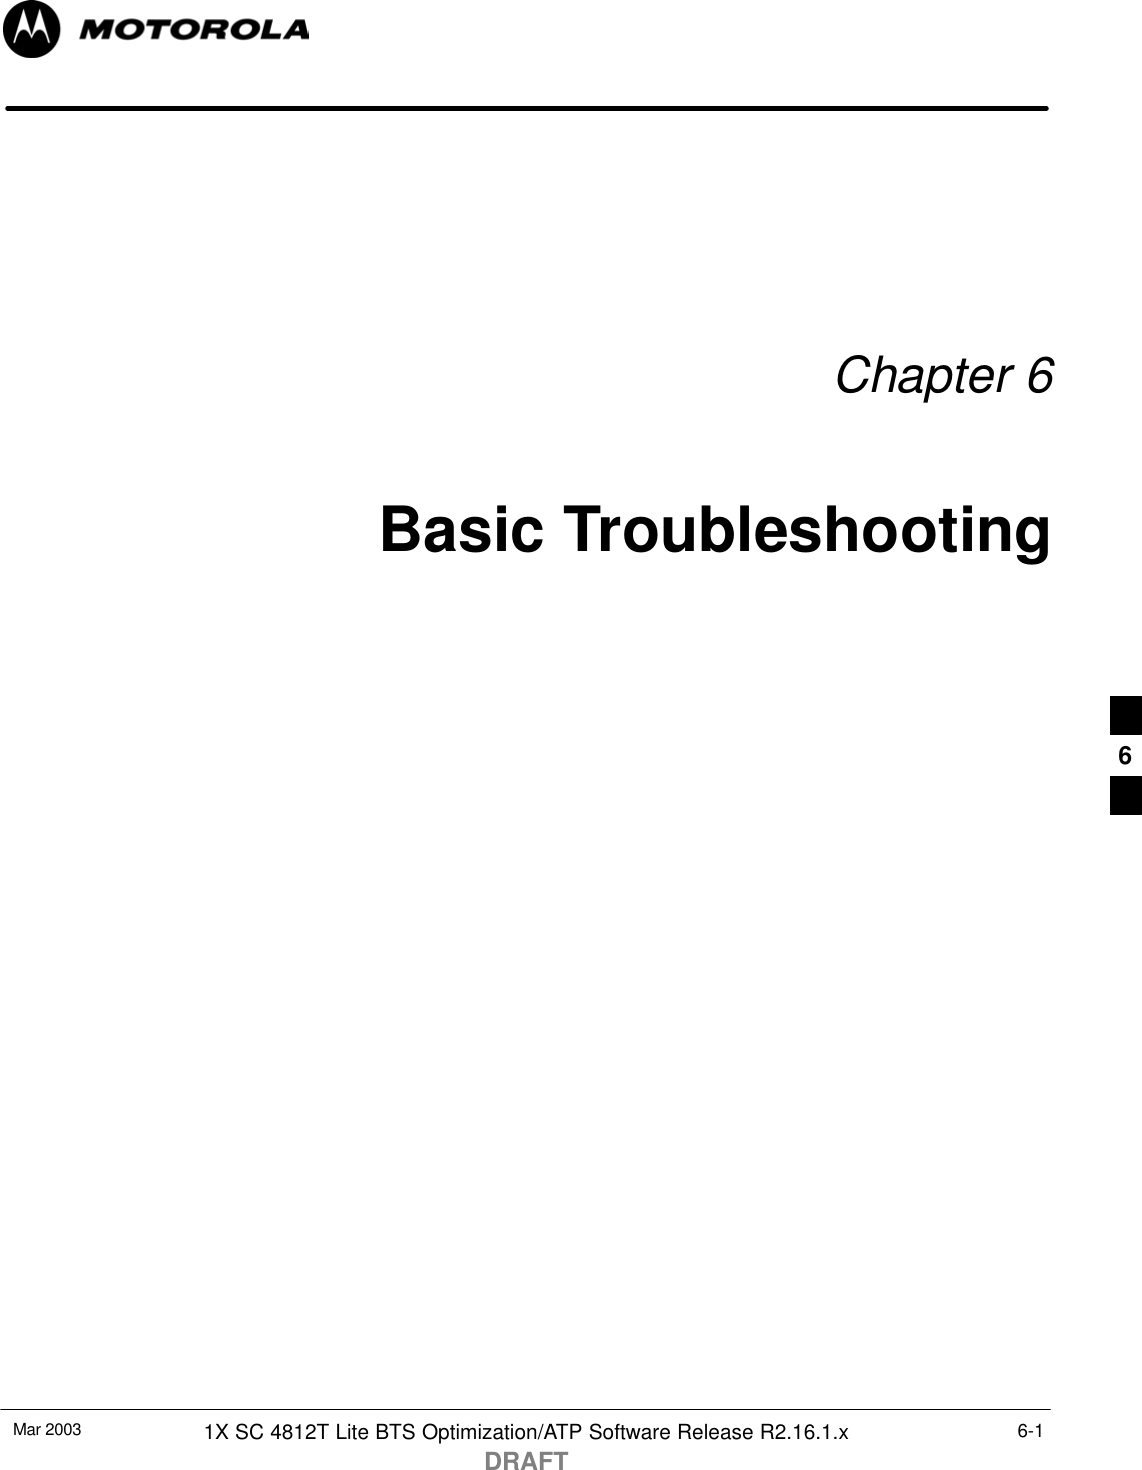 Mar 2003 1X SC 4812T Lite BTS Optimization/ATP Software Release R2.16.1.xDRAFT6-1Chapter 6Basic Troubleshooting6